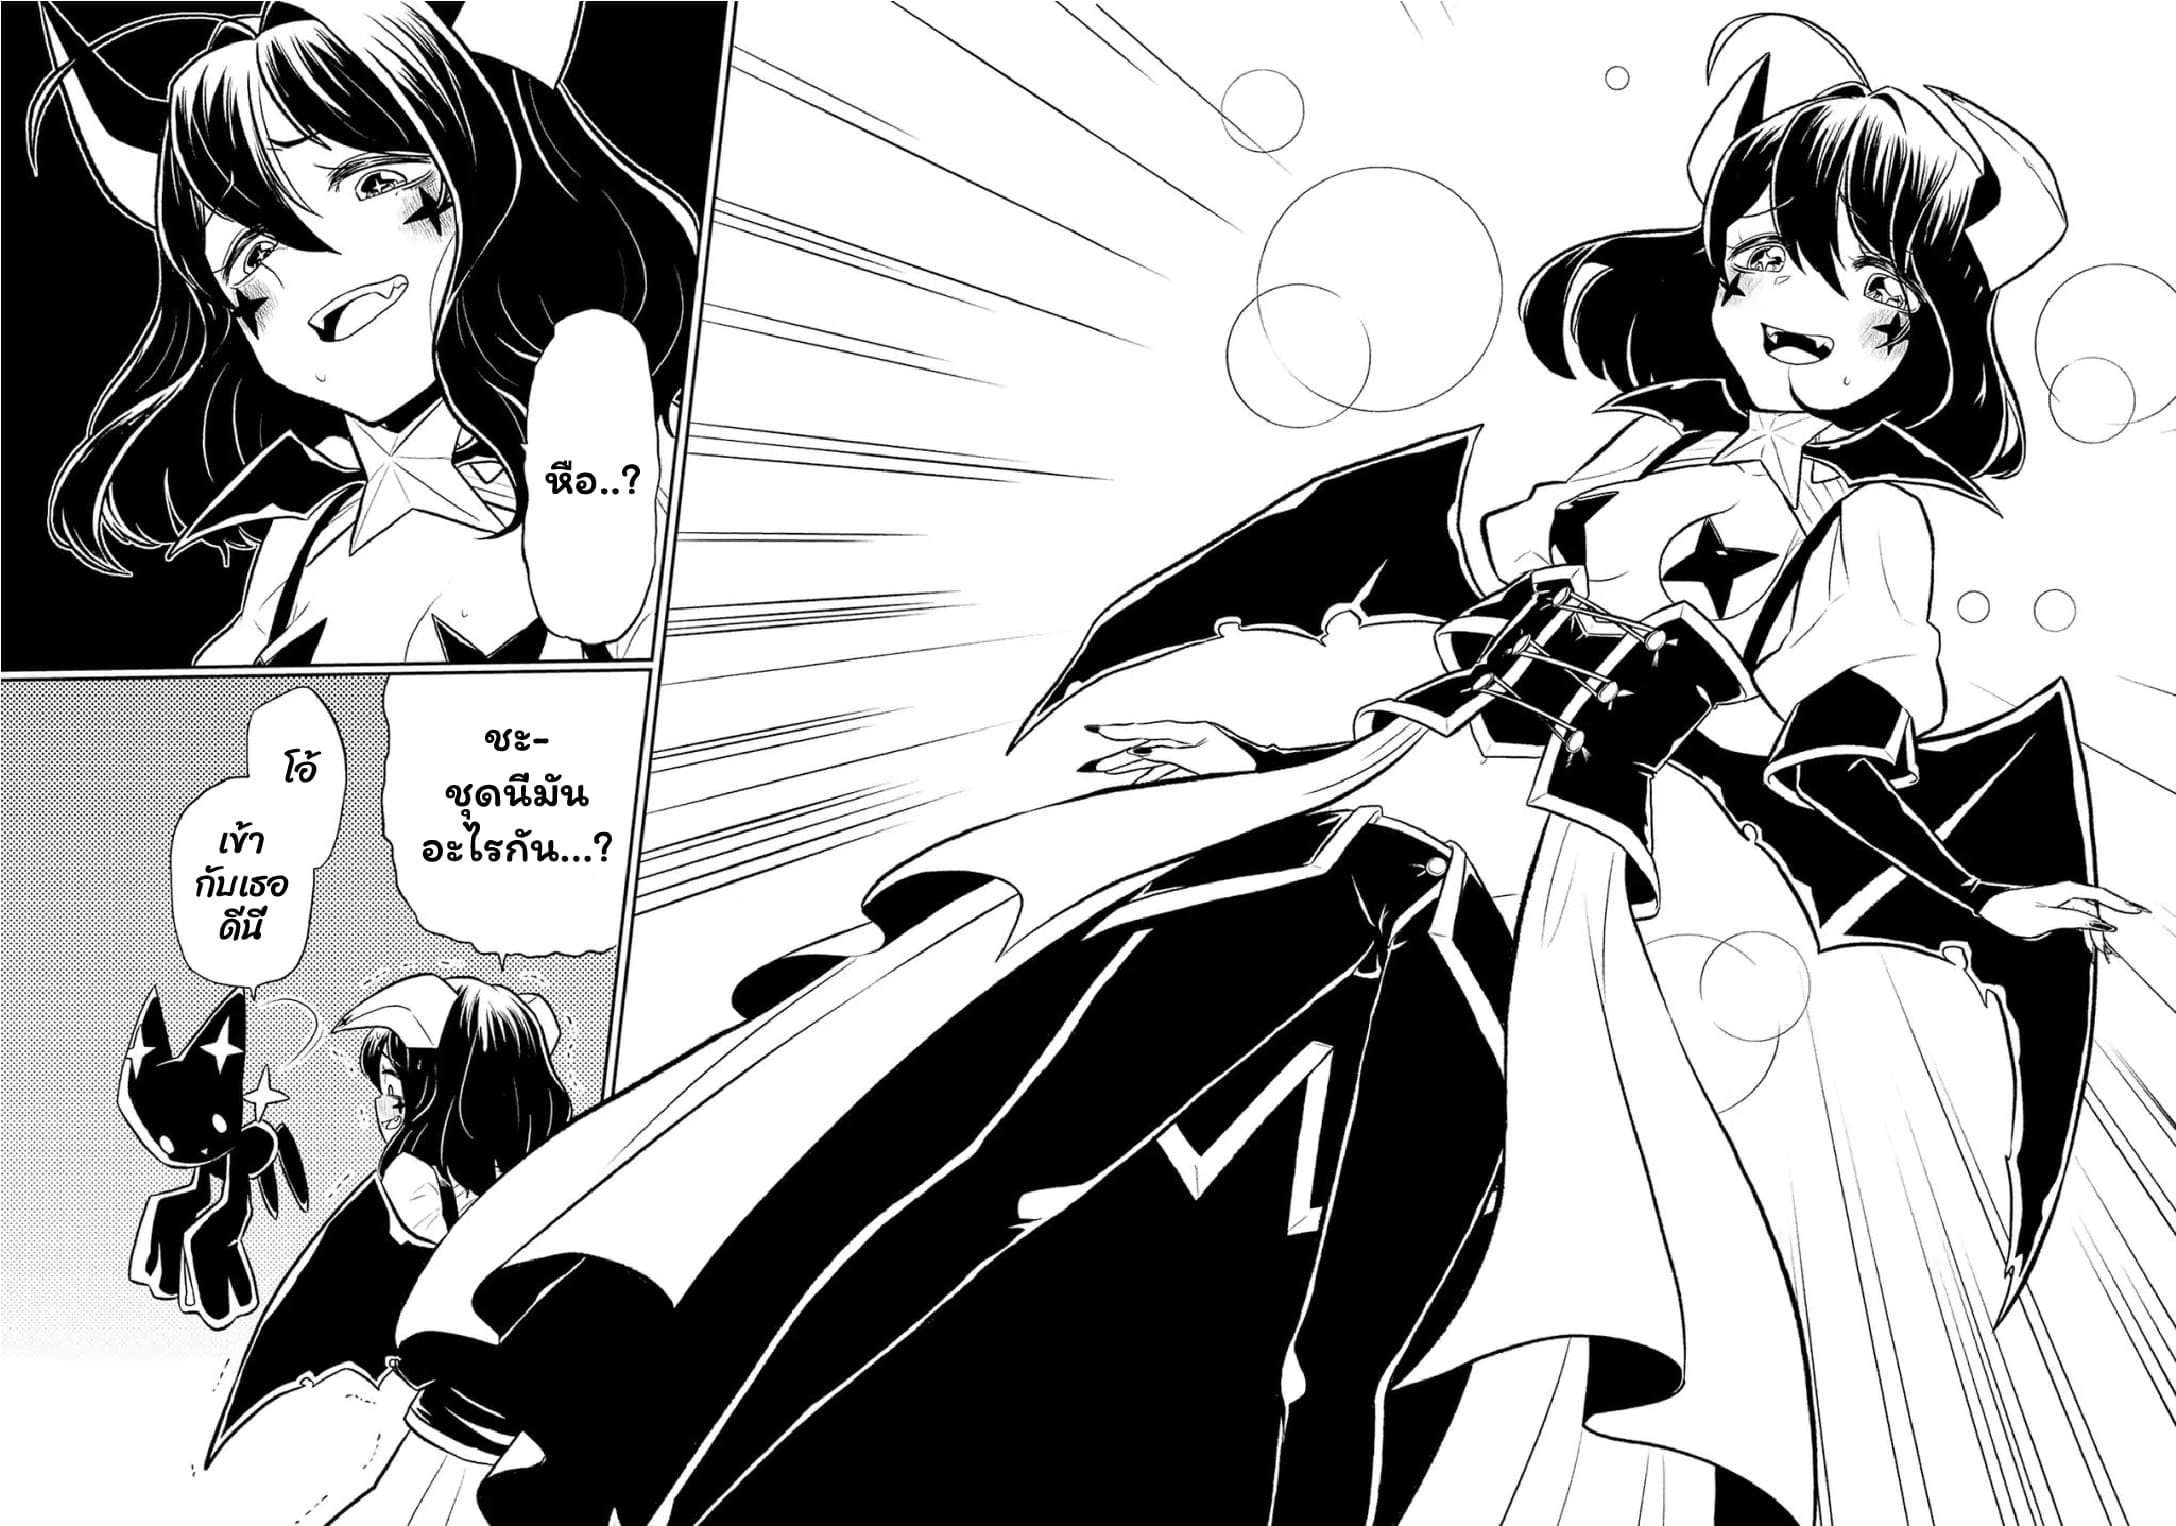 Looking up to Magical Girls 1 (6)